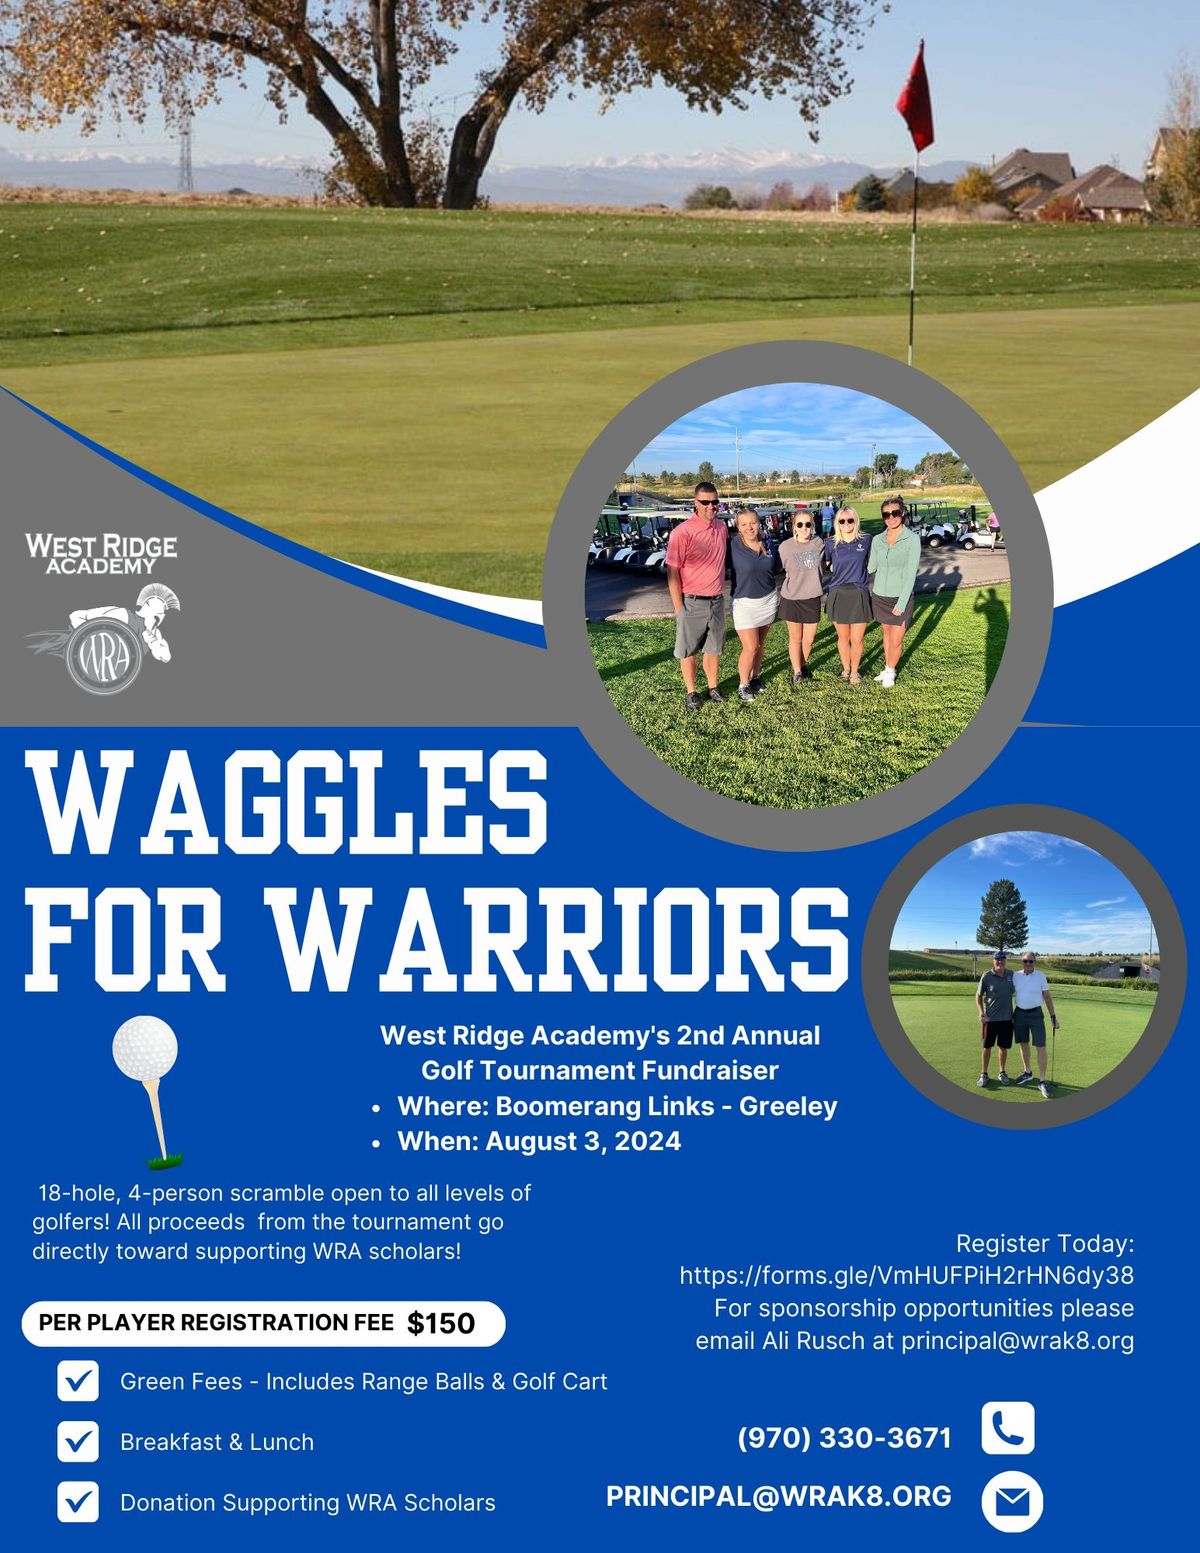 2nd Annual Waggles for Warriors 